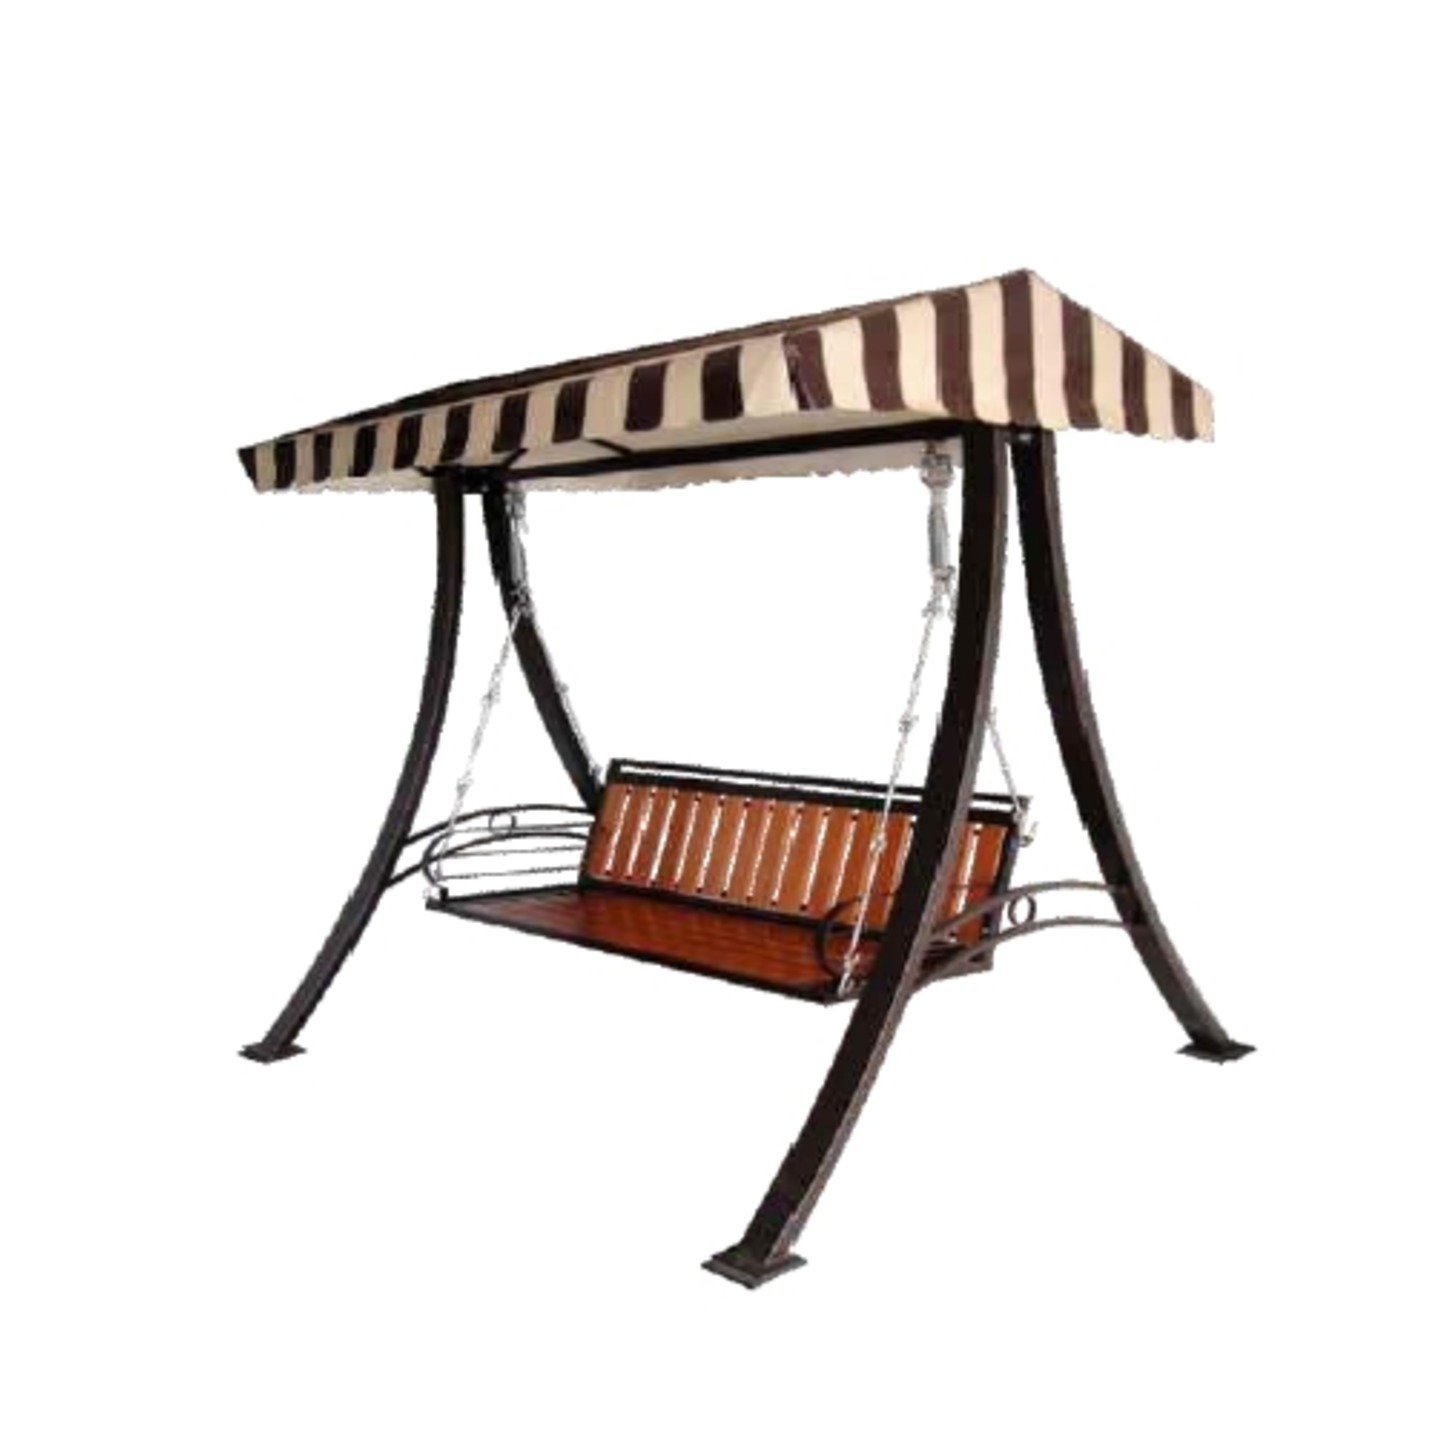 HJA Swing With Stand Roof HOJ-025 In Brown & Black Colour